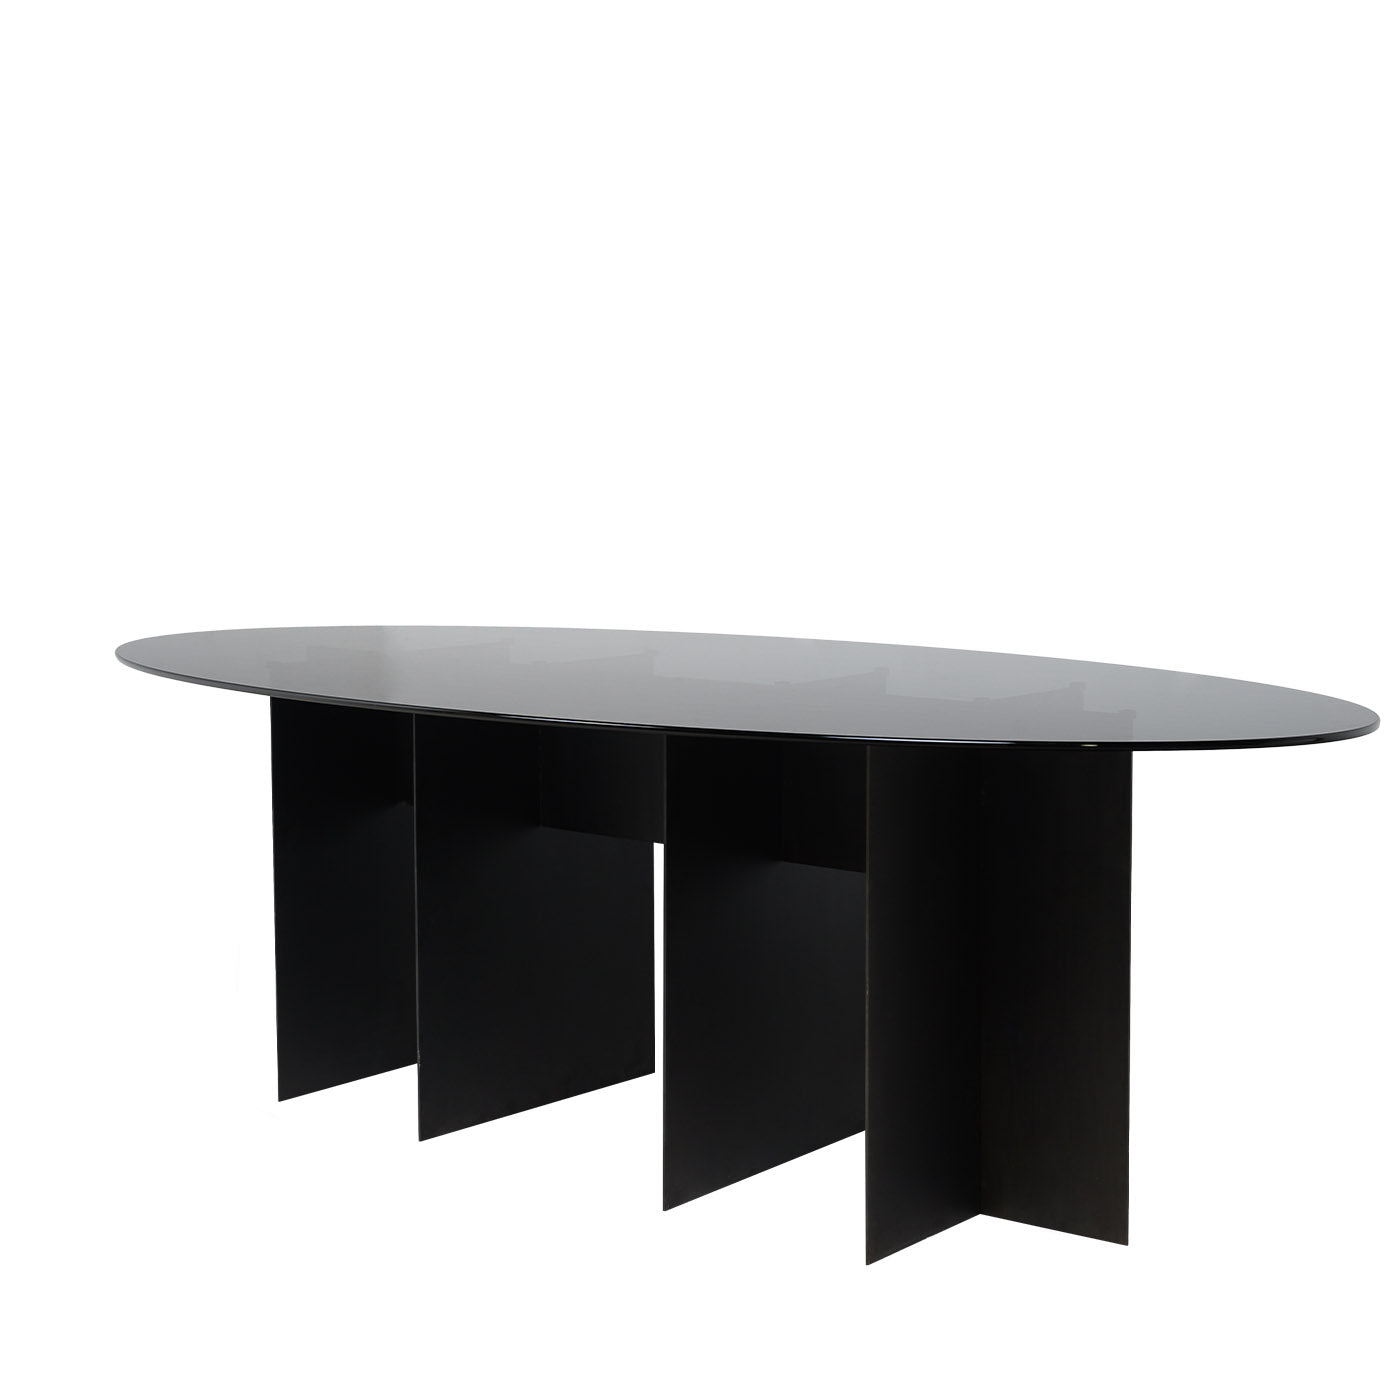 Roy Oval Black Dining Table by Filippo Montaina - Alternative view 4